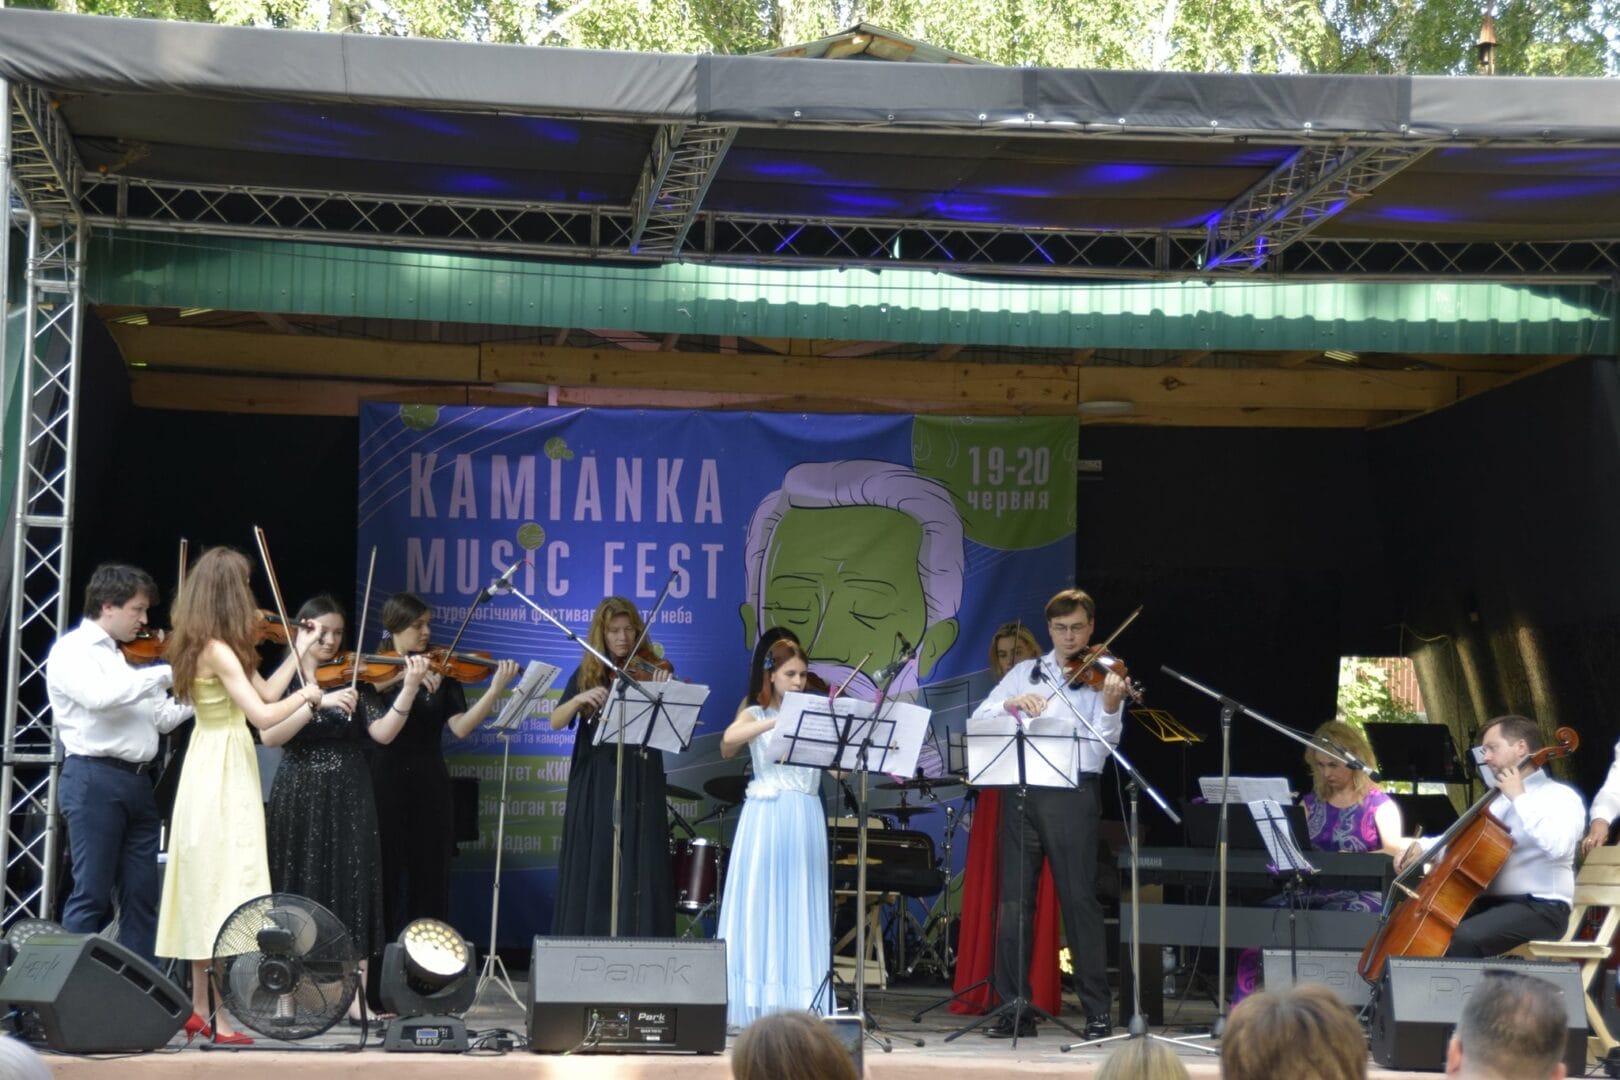 Kamianka Music Fest, an annual classical and jazz music concert held in 2021 